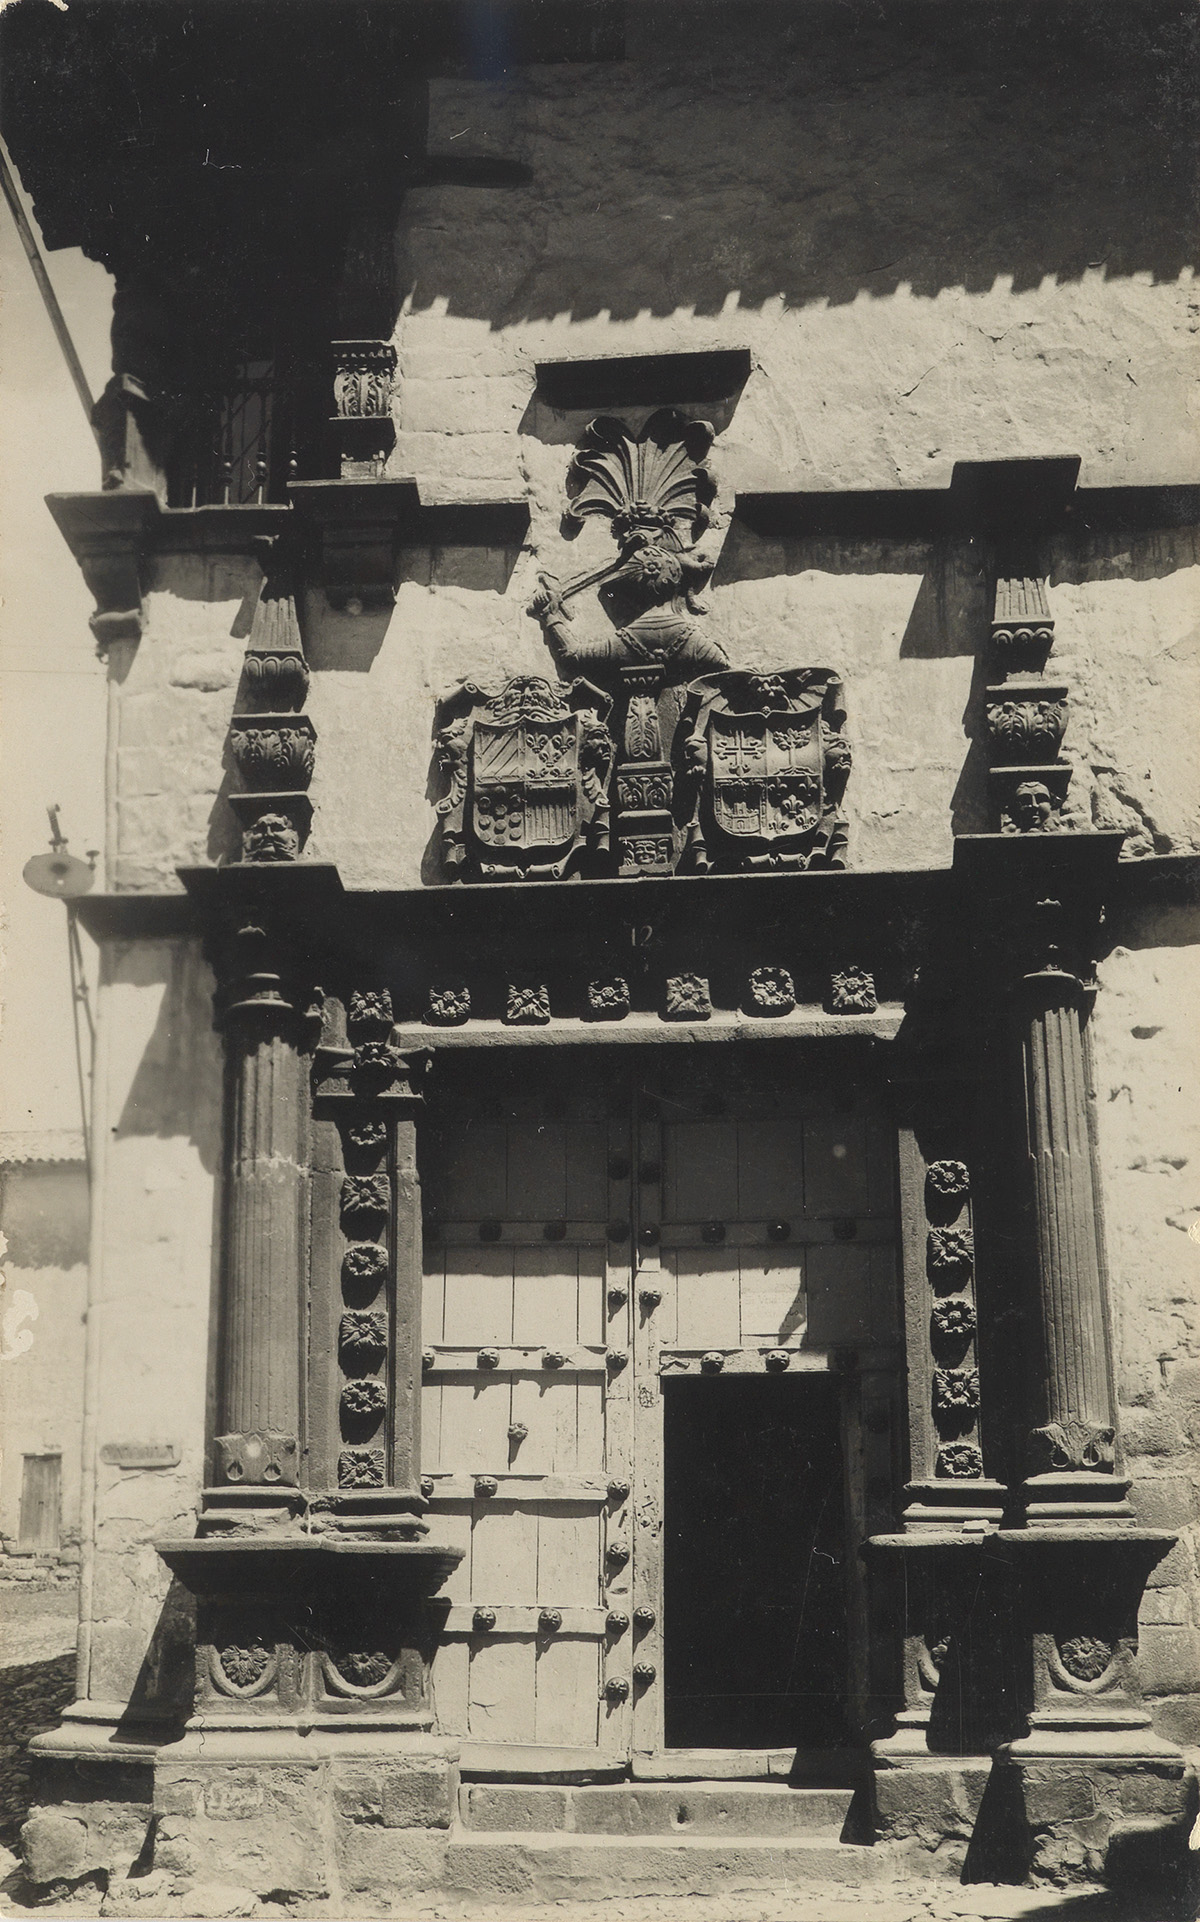 MARTIN CHAMBI (1891-1973) A collection of 54 photographs depicting the architecture of Cuzco, Peru, and the remarkable archaeological s